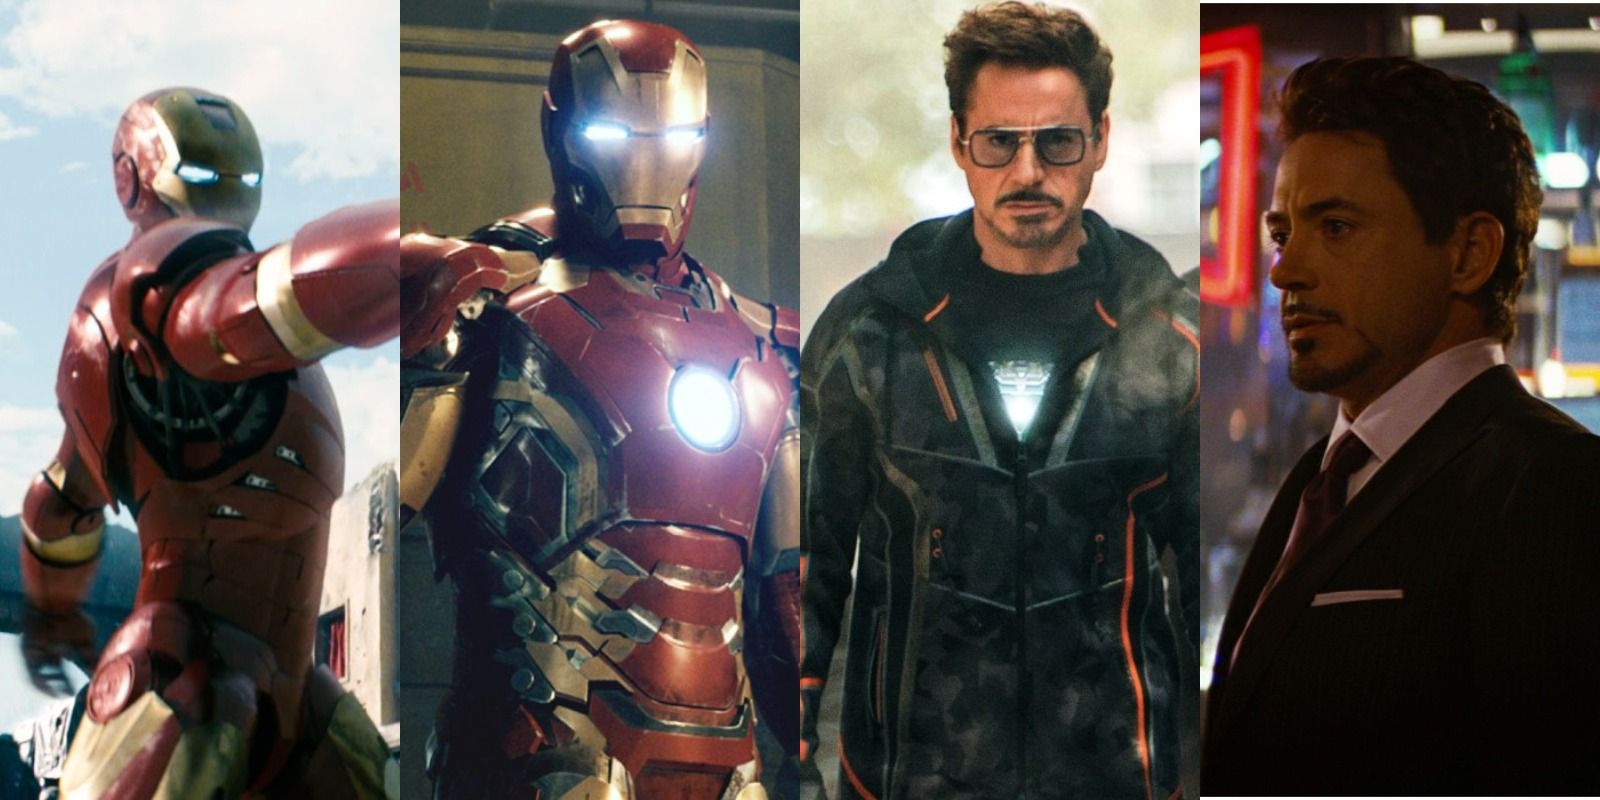 10 Unmistakable Tony Stark Traits In The MCU Films